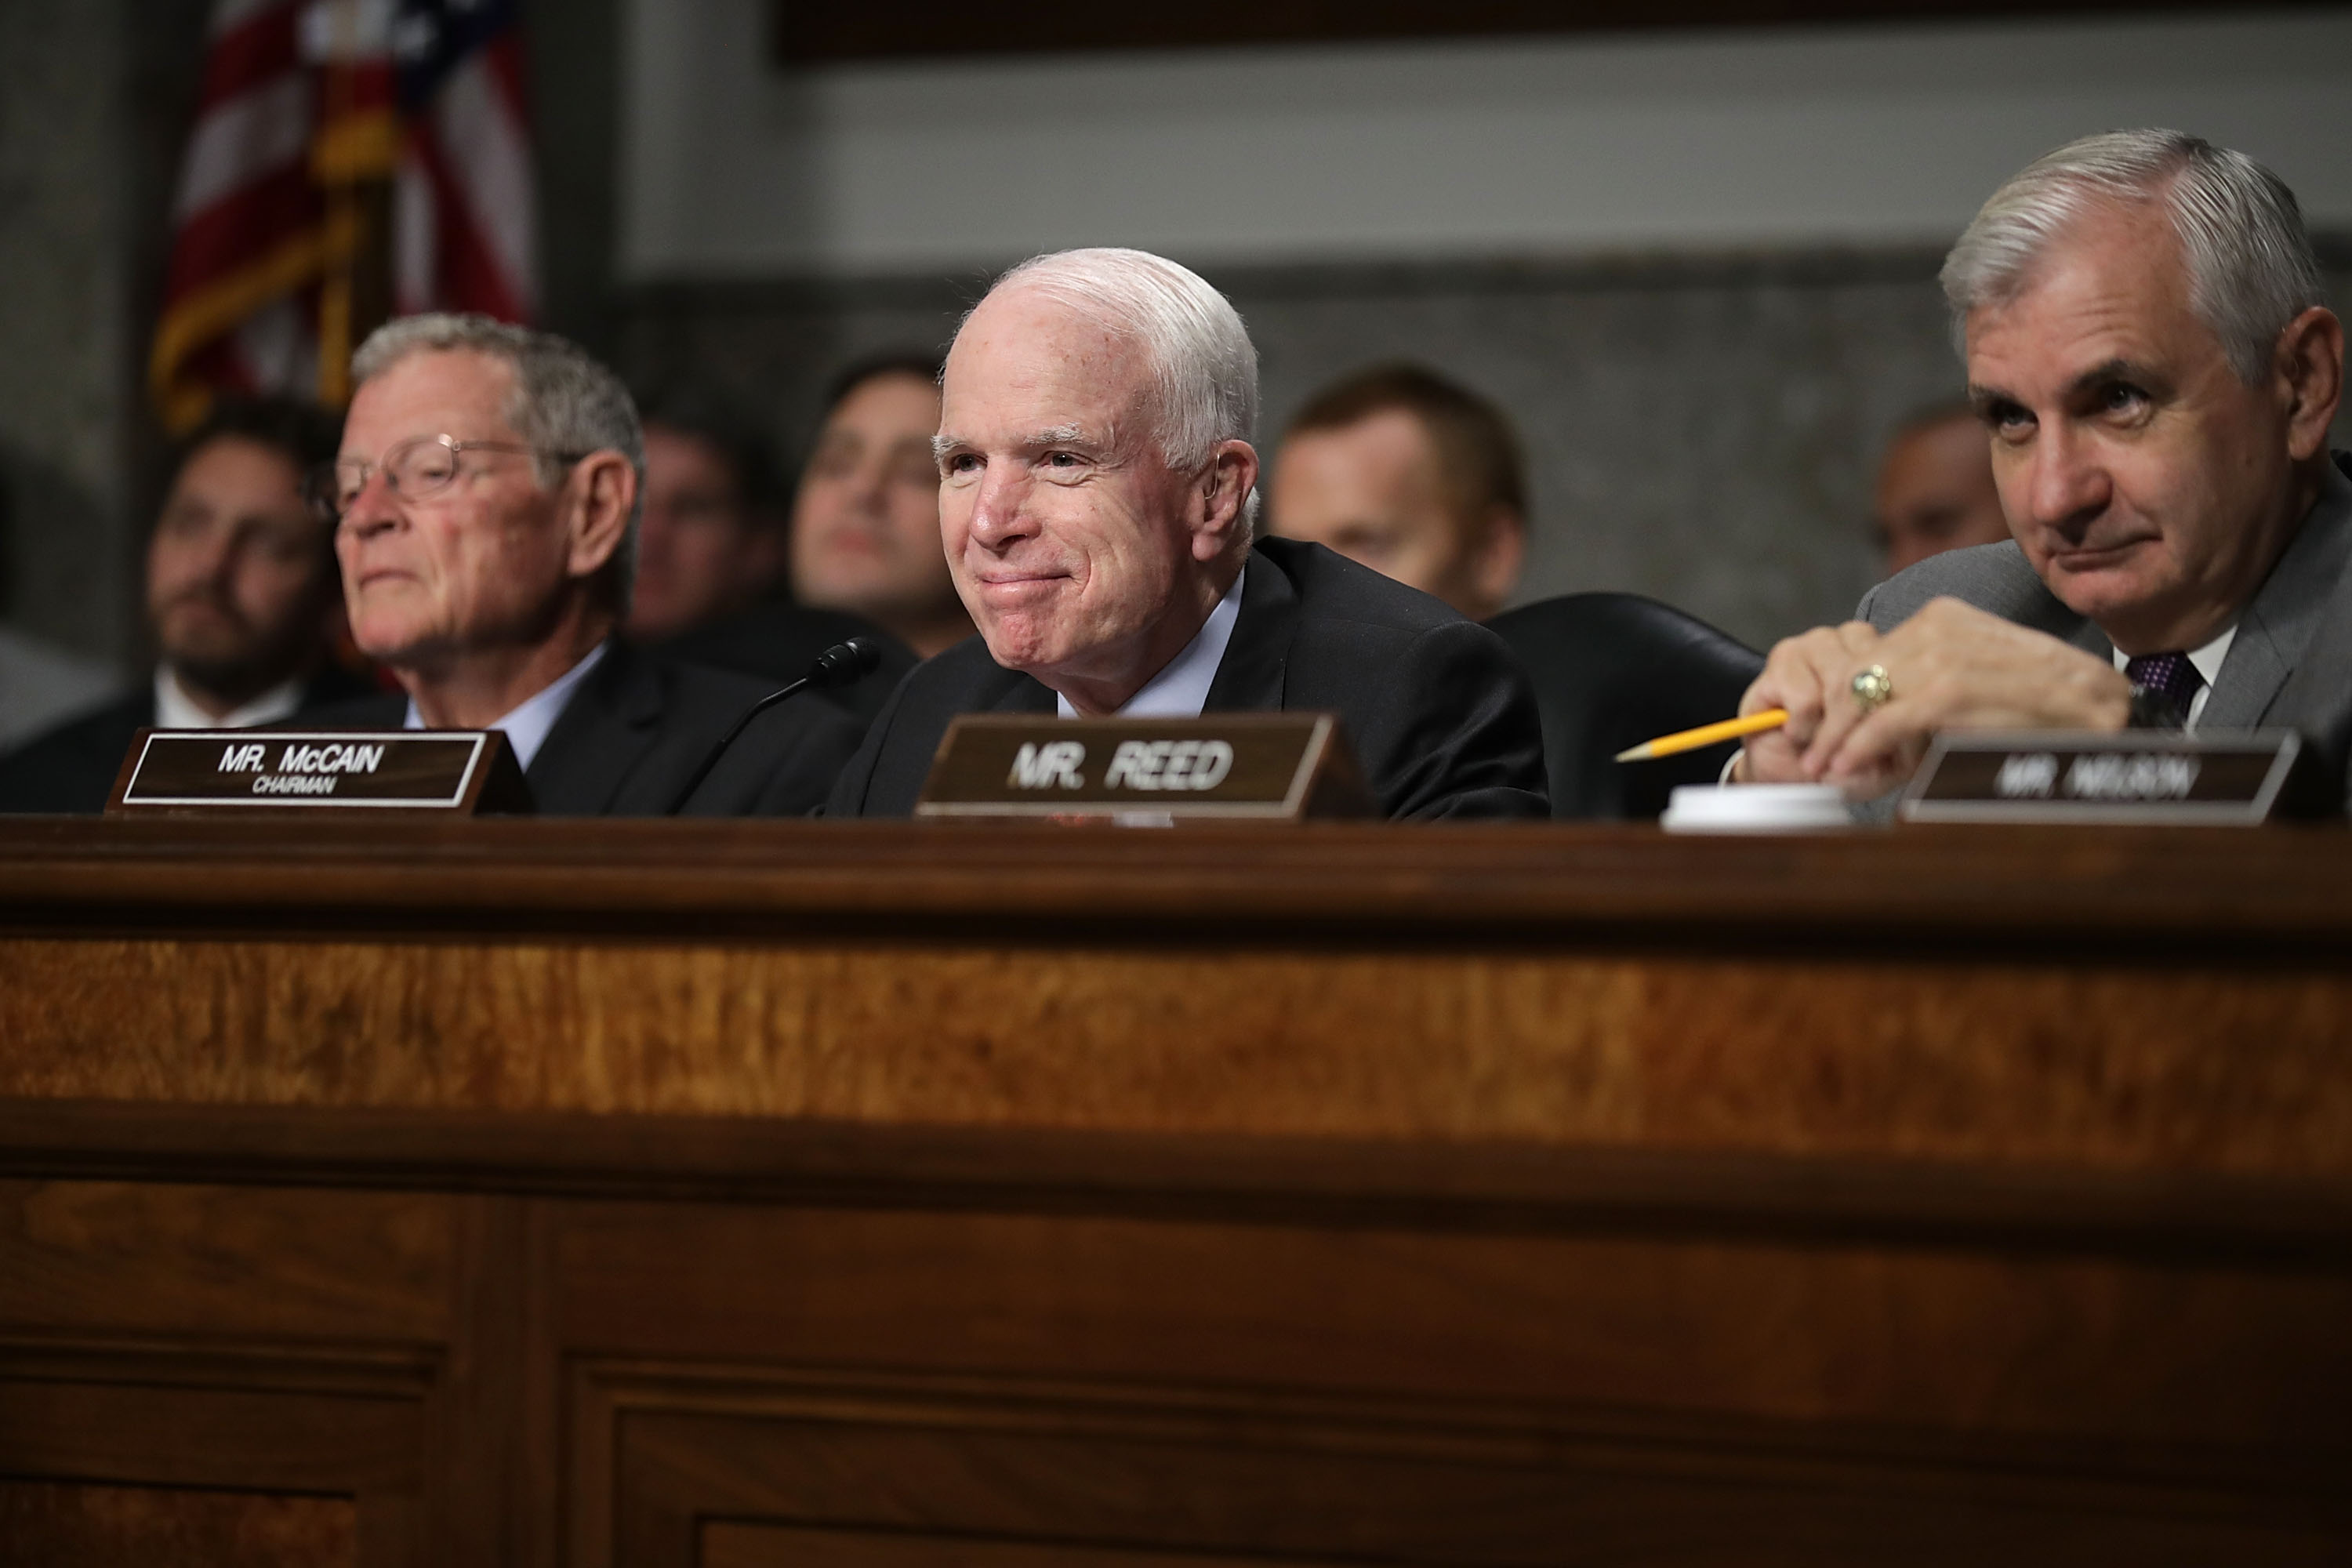 Senate Armed Services Committee members (L-R) Sen. James Inhofe (R-OK), Chairman John McCain (R-AZ) and ranking member Sen. Jack Reed (R-RI) listen to testimony during the confirmation hearing for Richard Spencer in the Dirksen Senate Office Building on Capitol Hill July 11, 2017 in Washington, DC. Spencer was nominated by President Donald Trump to be the 76th secretary of the U.S. Navy. (Chip Somodevilla&mdash;Getty Images)